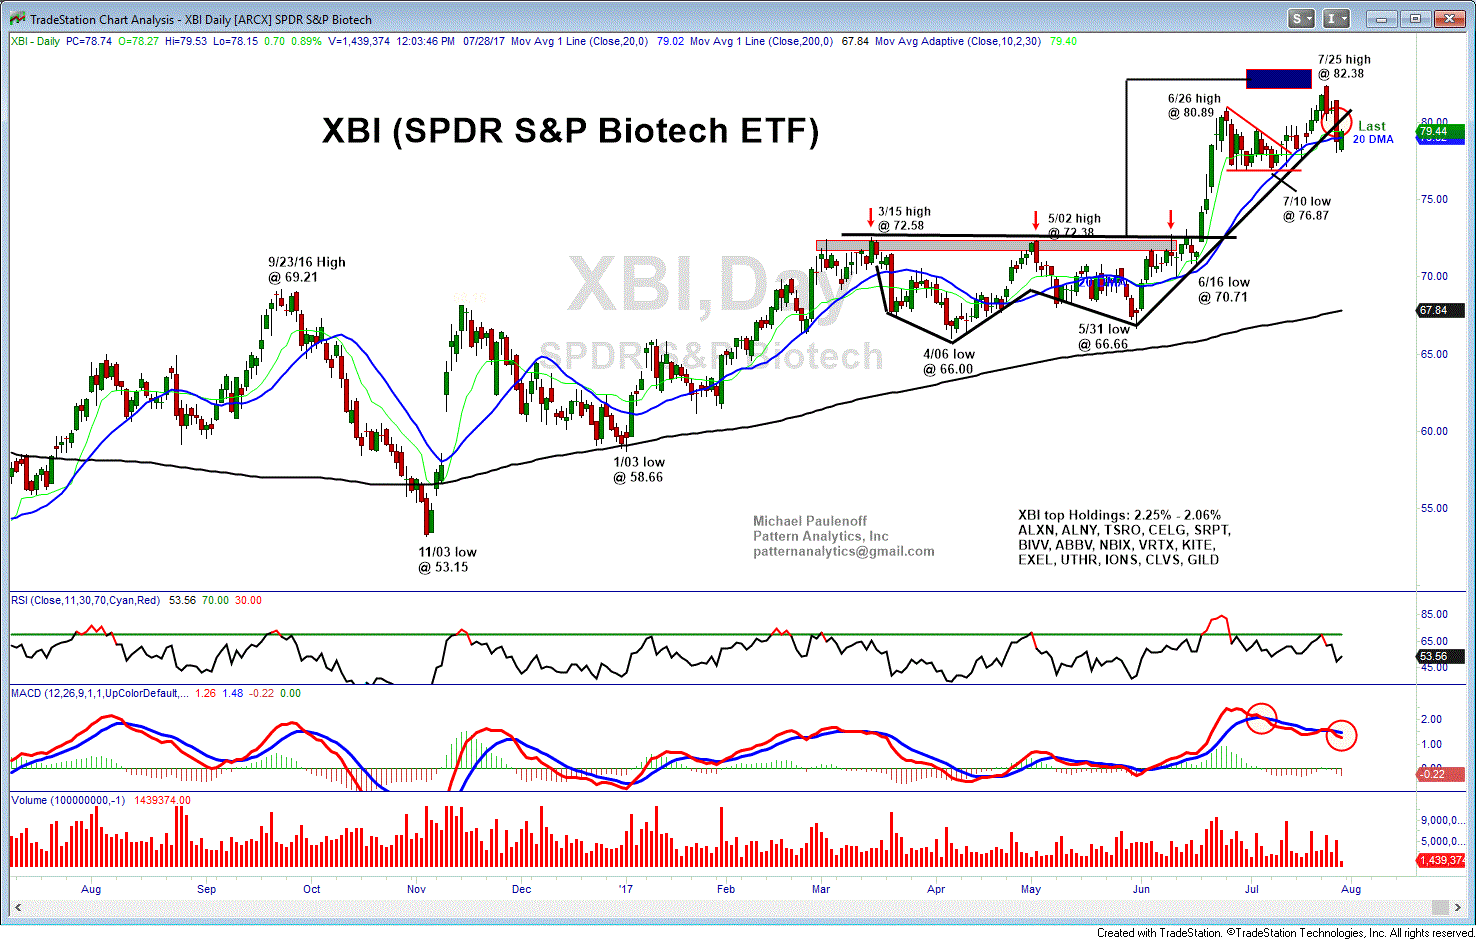 Daily SPDR S&P Biotech